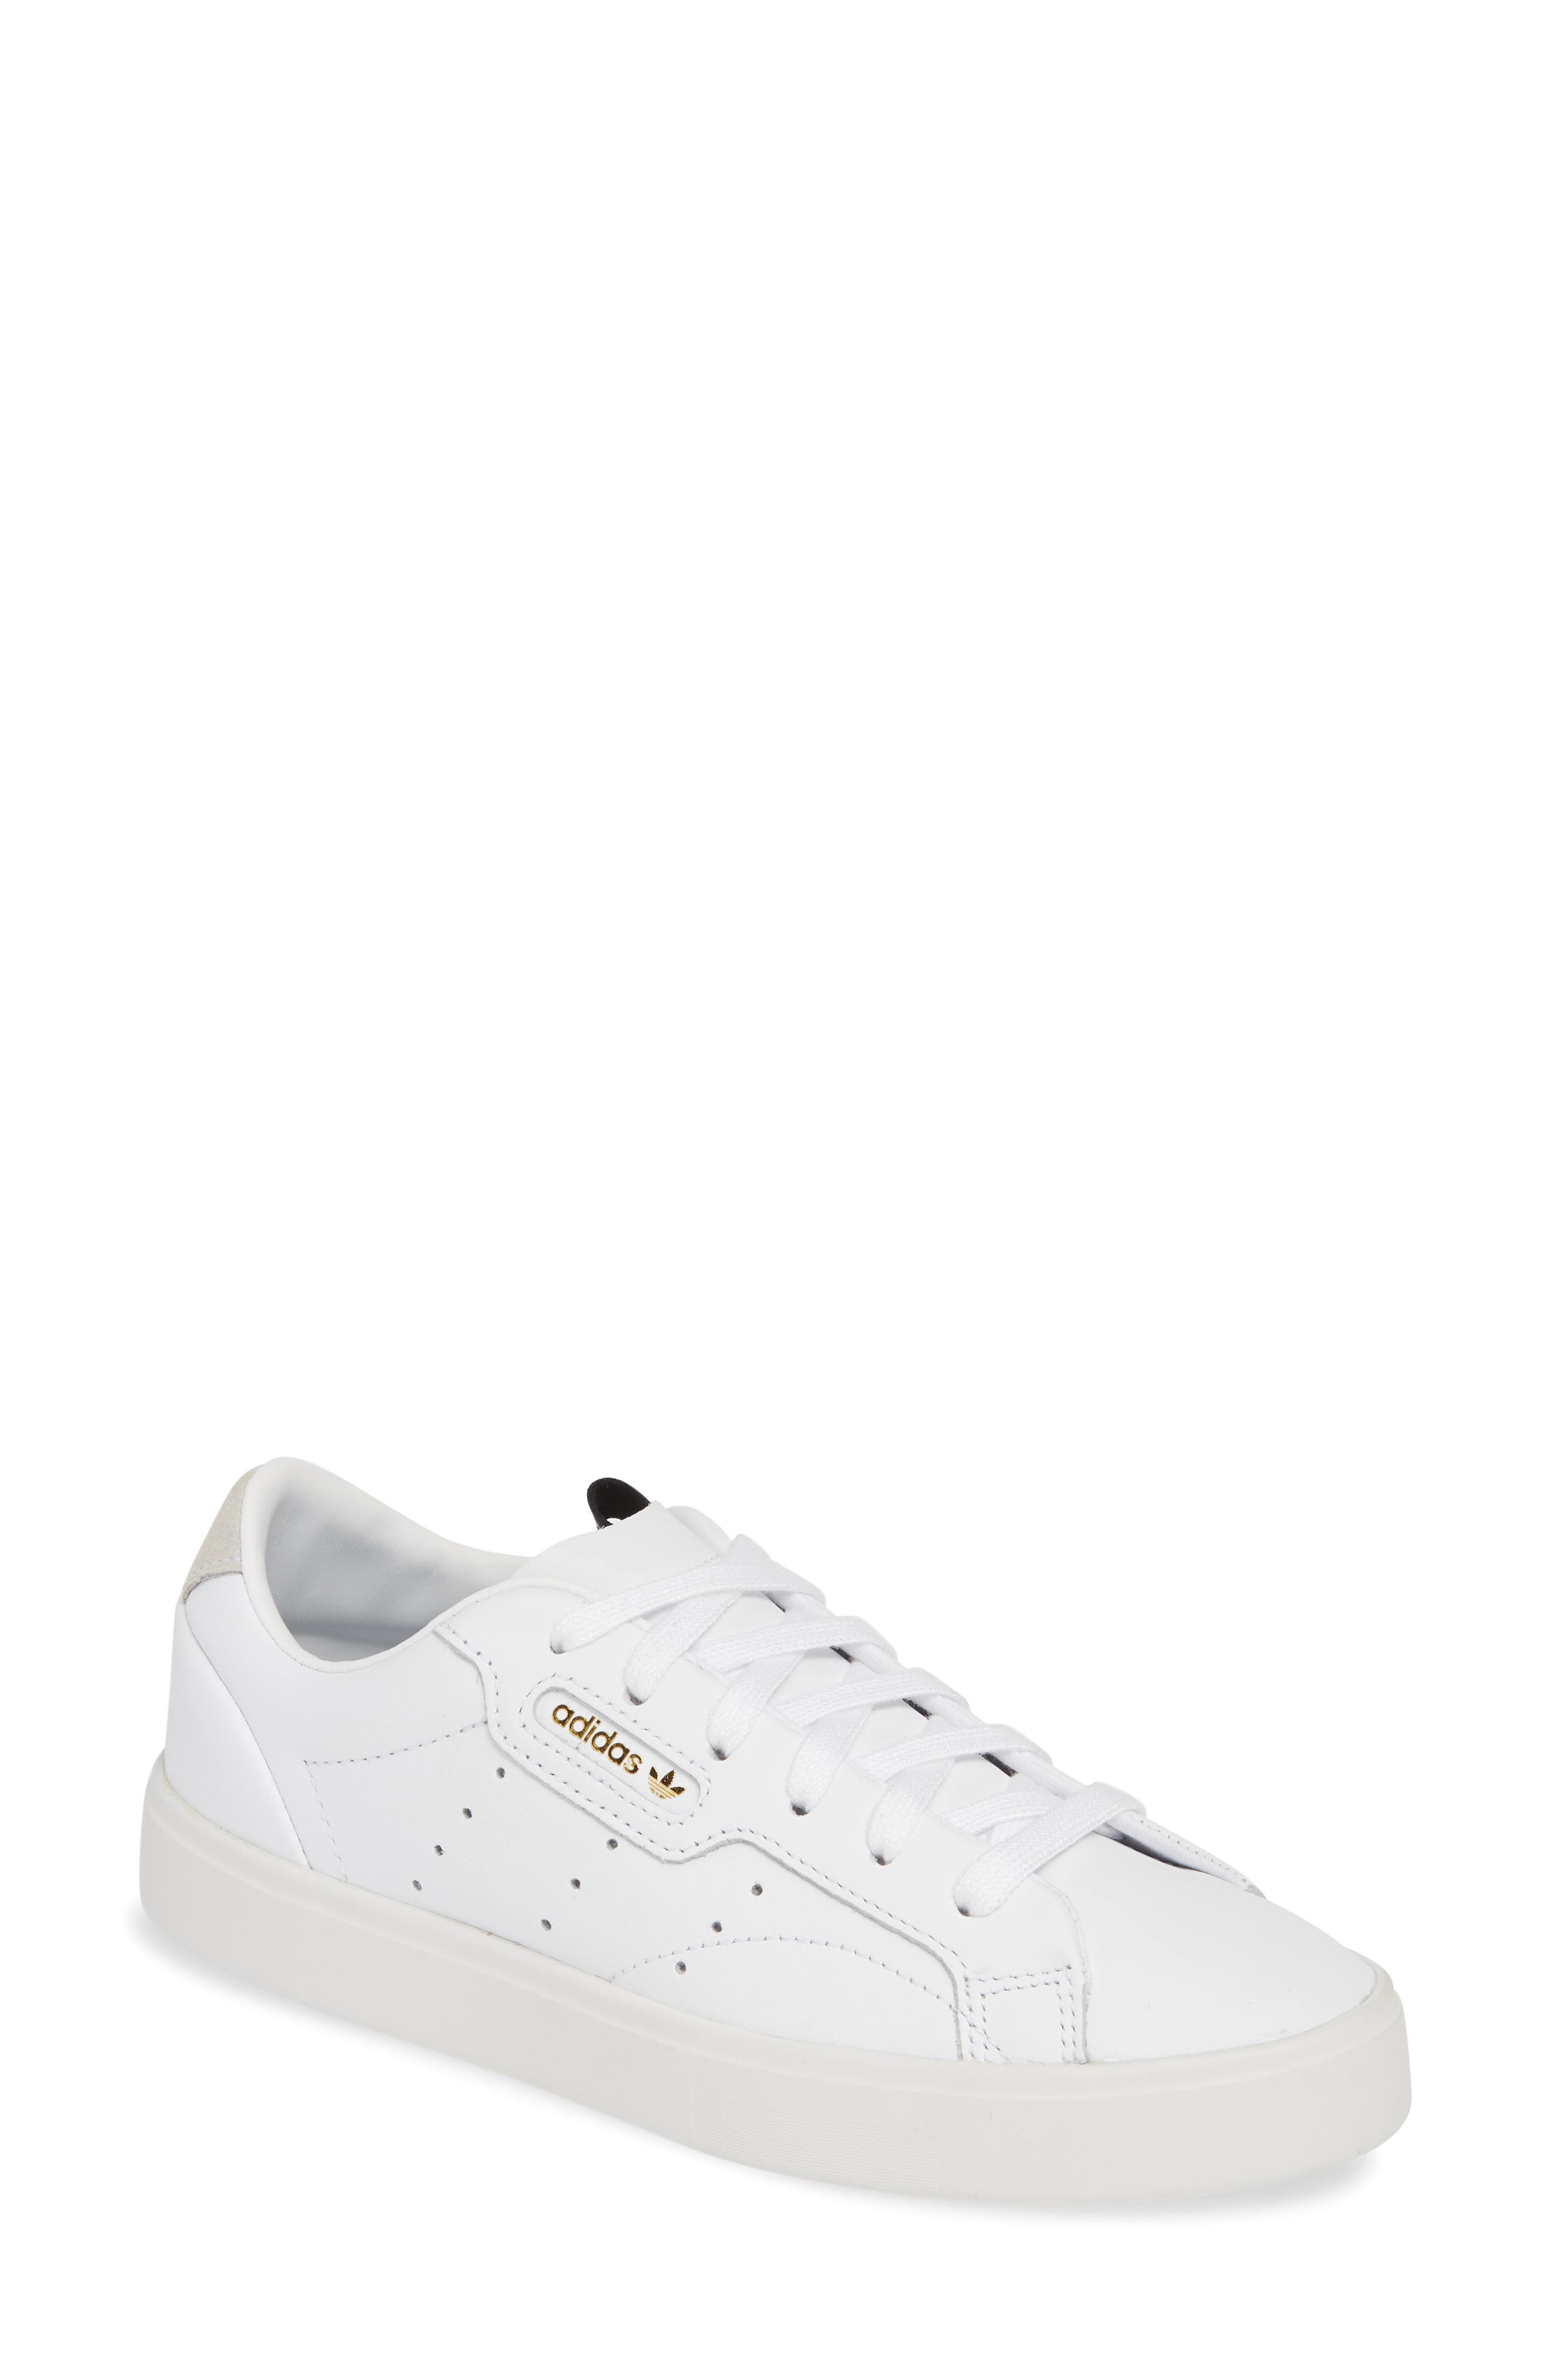 white leather tennis shoes womens